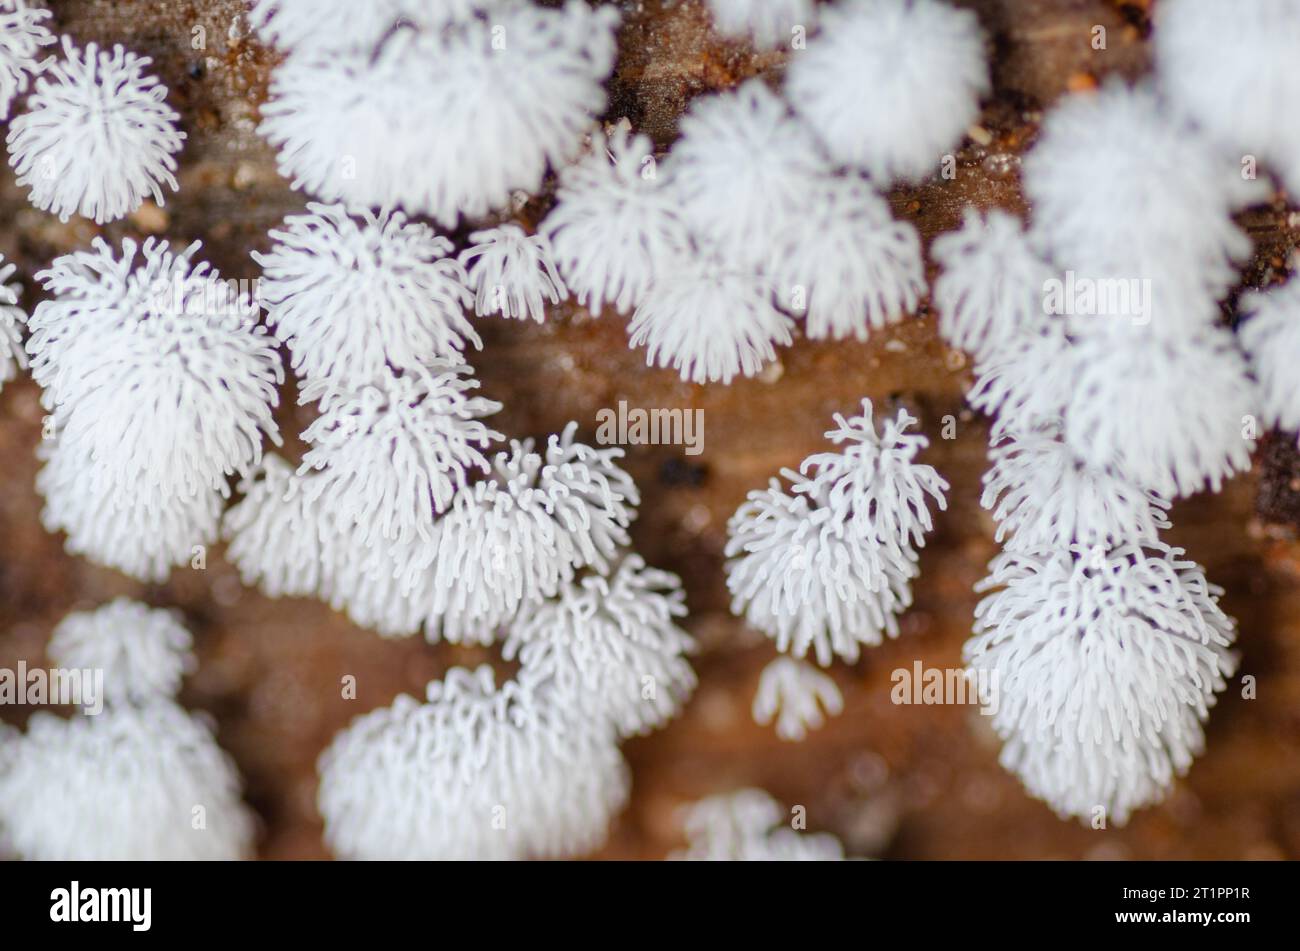 Closeup of the spore covered fingers of honeycomb coral slime mold, Ceratiomyxa fruticulosa, growing on a fallen tree in an East Texas forest. Stock Photo